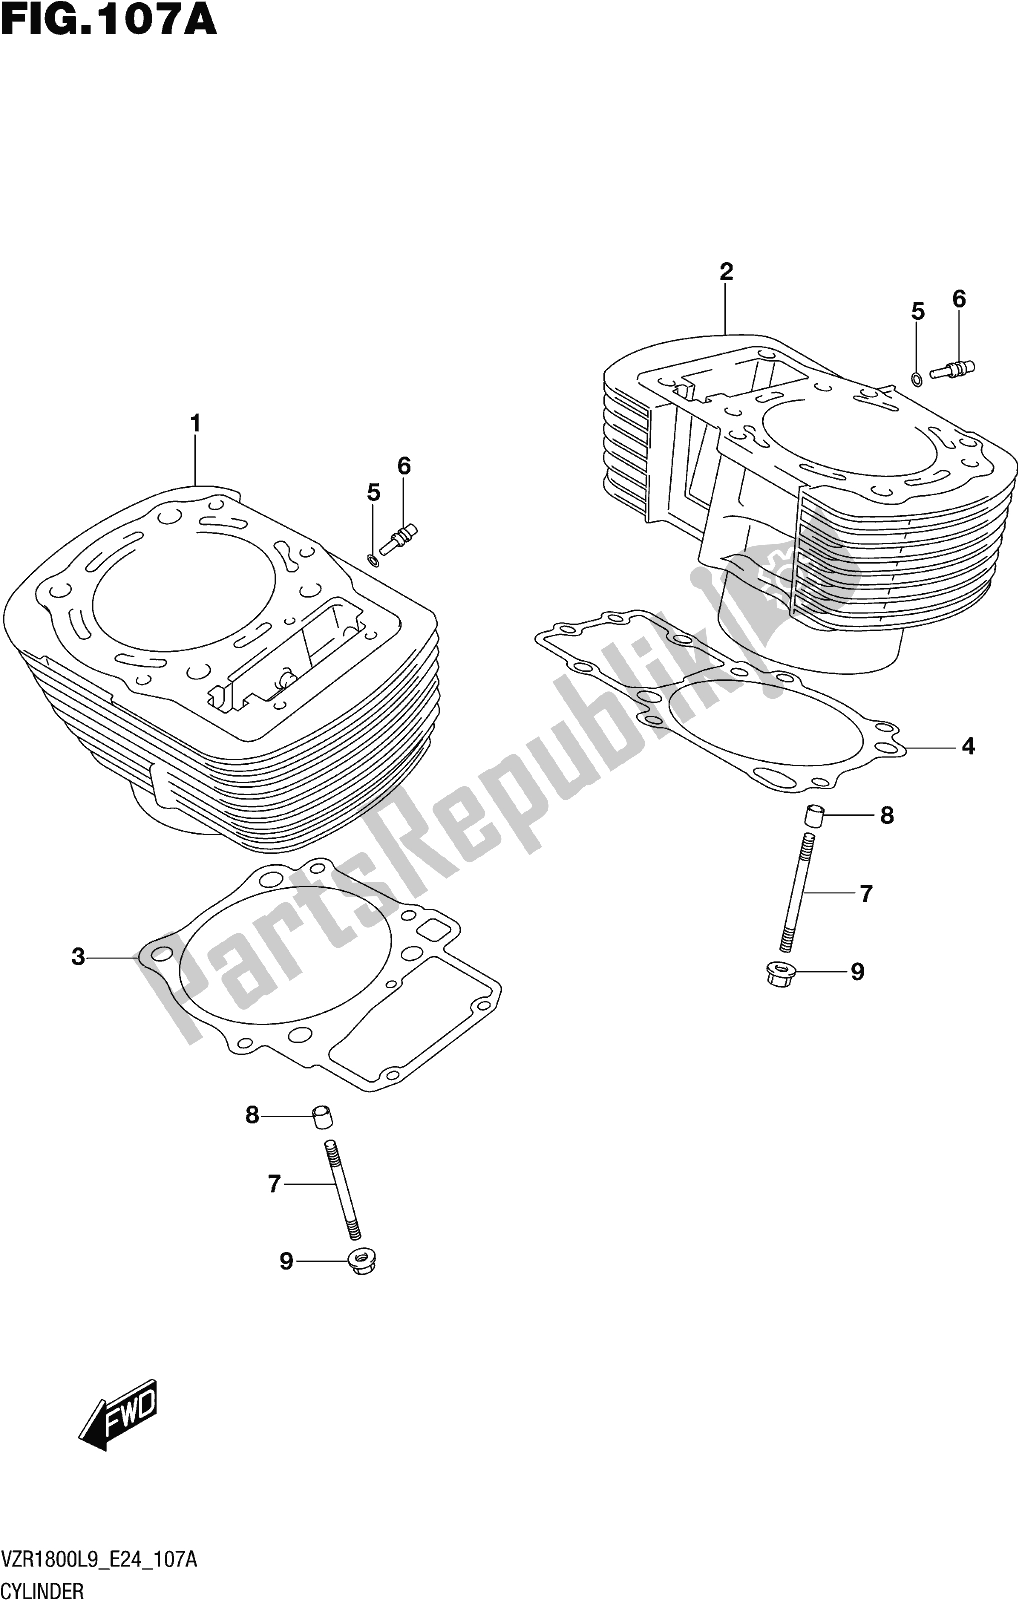 All parts for the Fig. 107a Cylinder of the Suzuki VZR 1800 2019